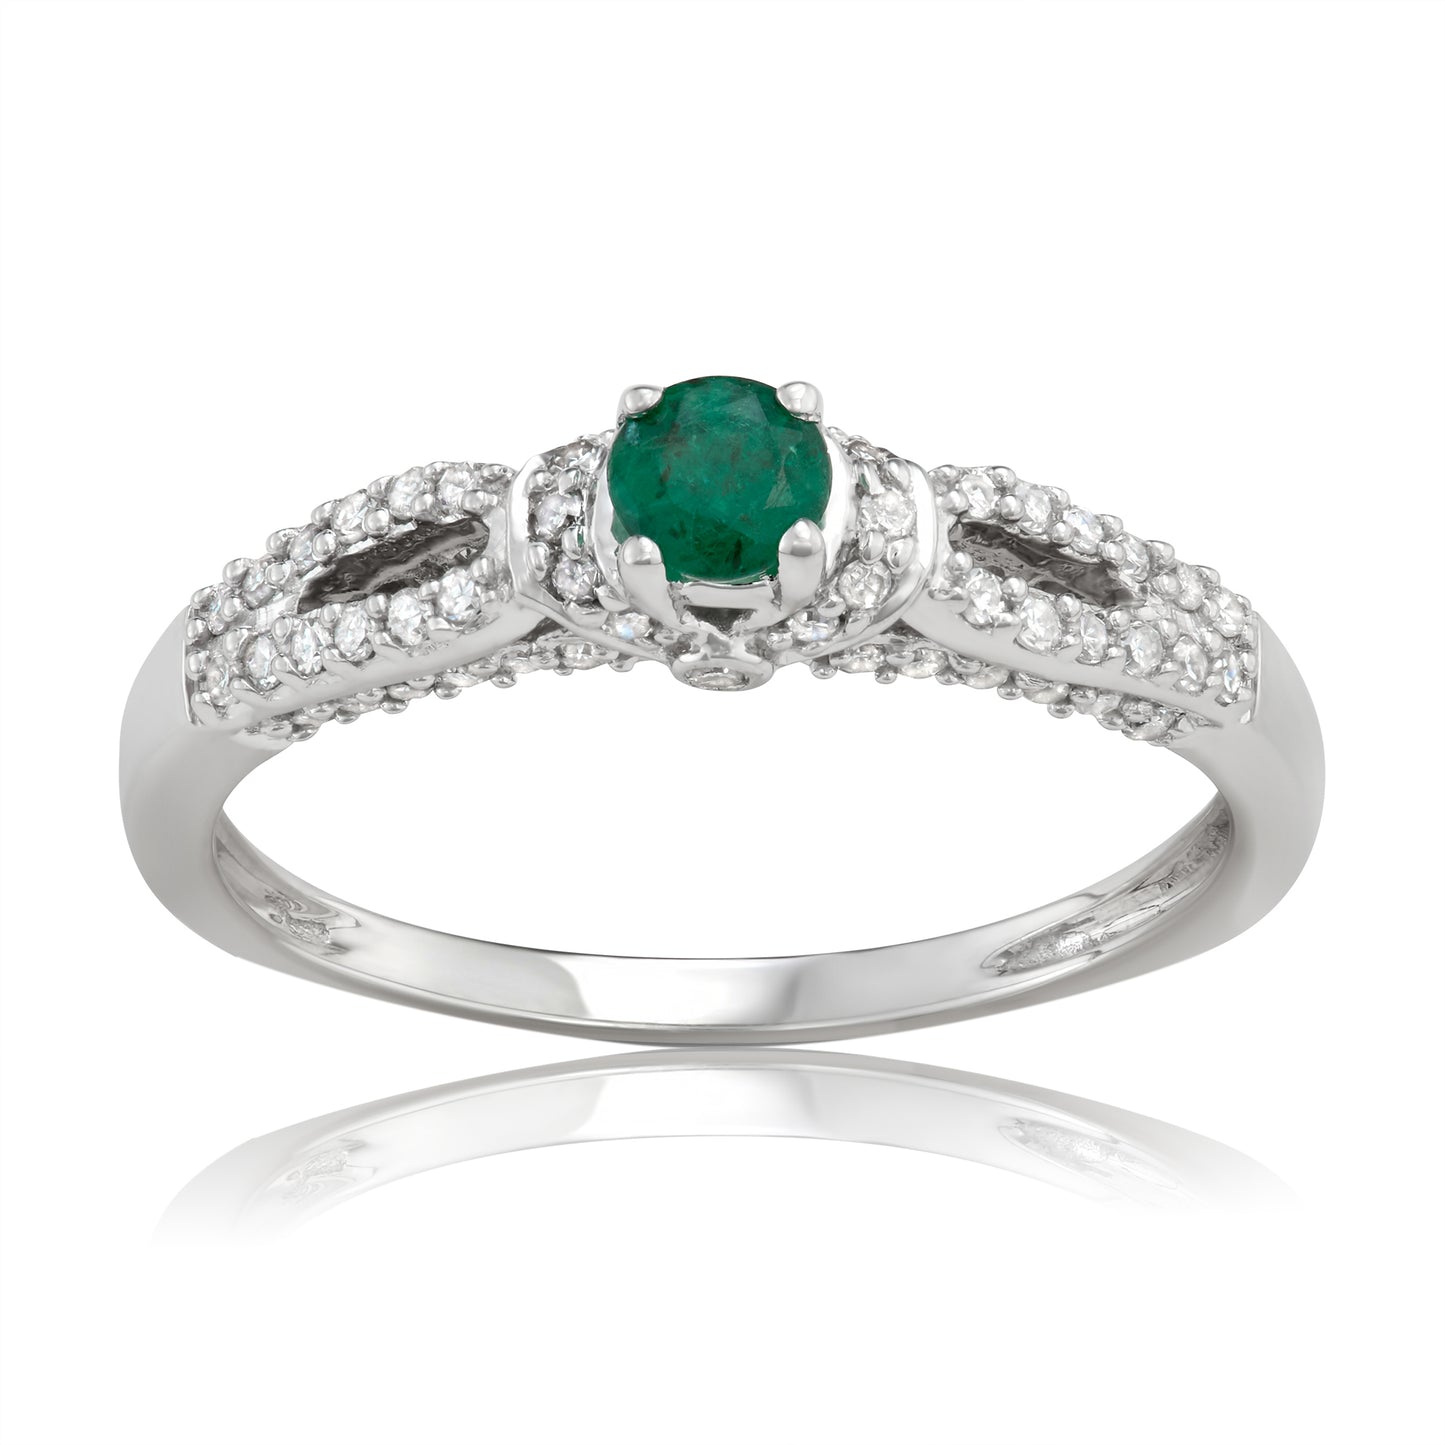 14K White Gold 0.50ct TW Emerald and White Diamond Engagement Ring